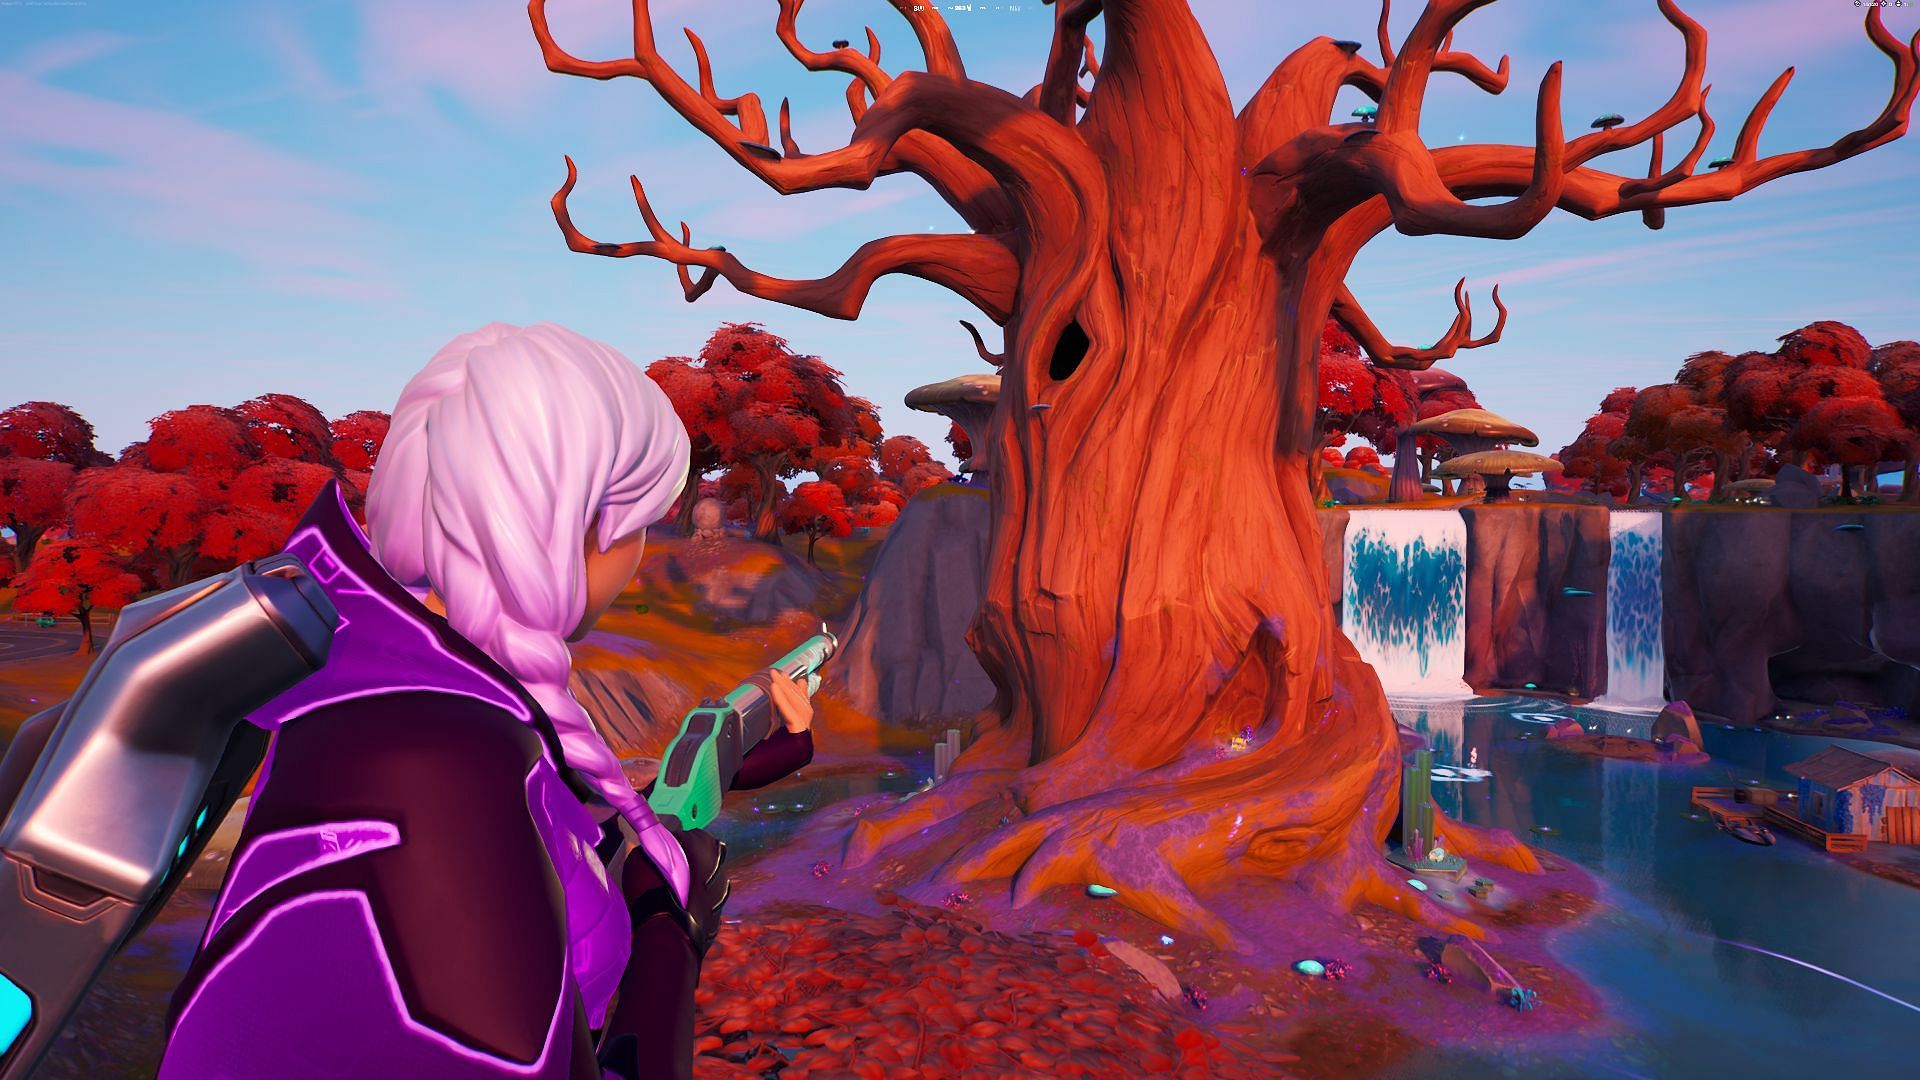 The Reality Tree has seen better days (Image via Epic Games/Fortnite)